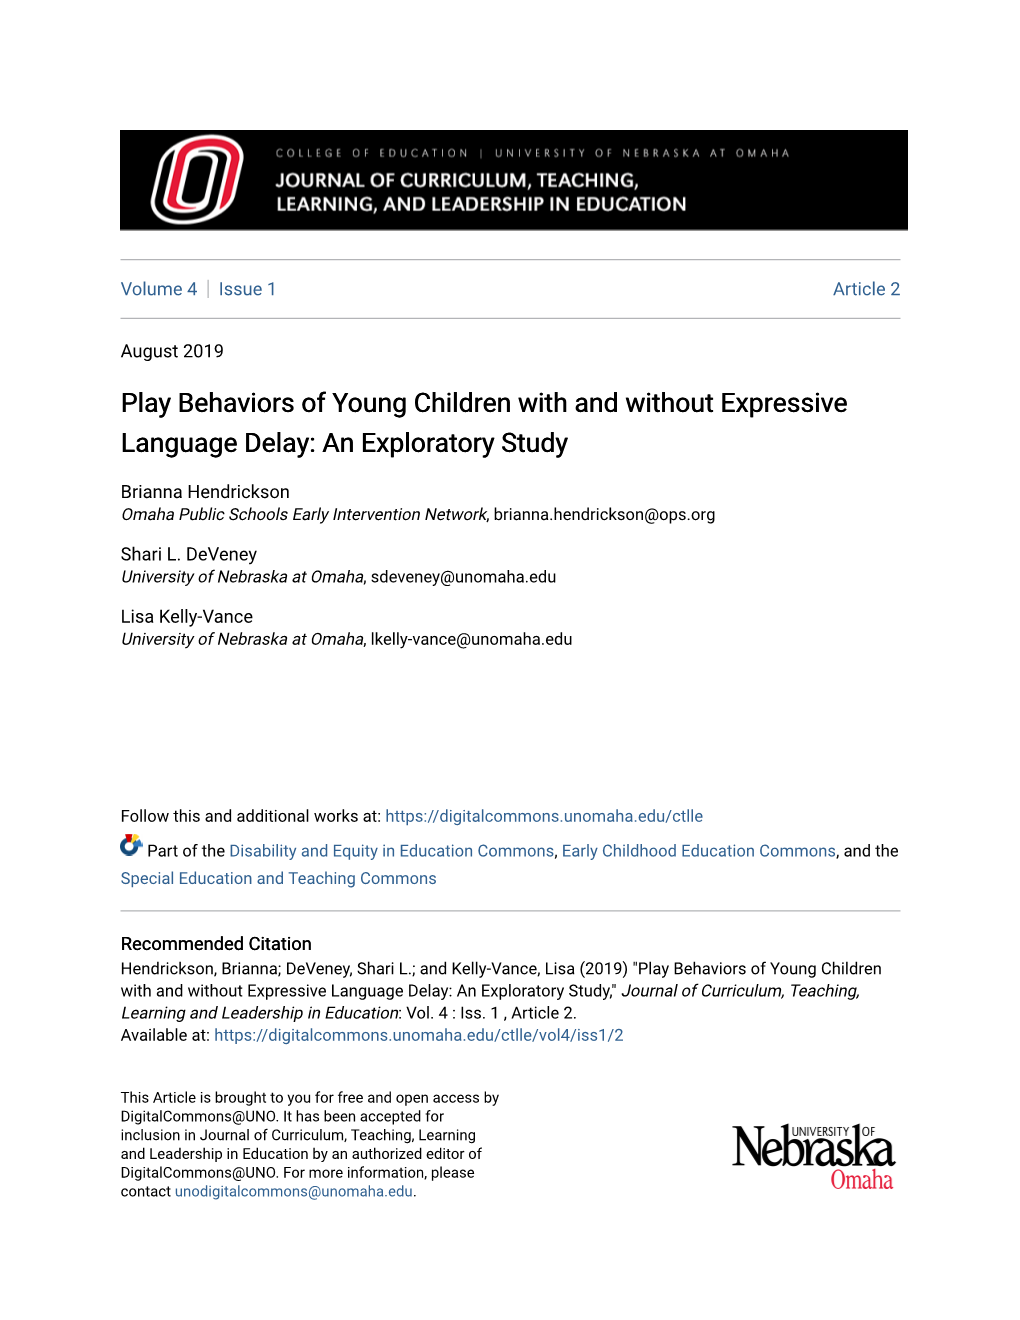 Play Behaviors of Young Children with and Without Expressive Language Delay: an Exploratory Study